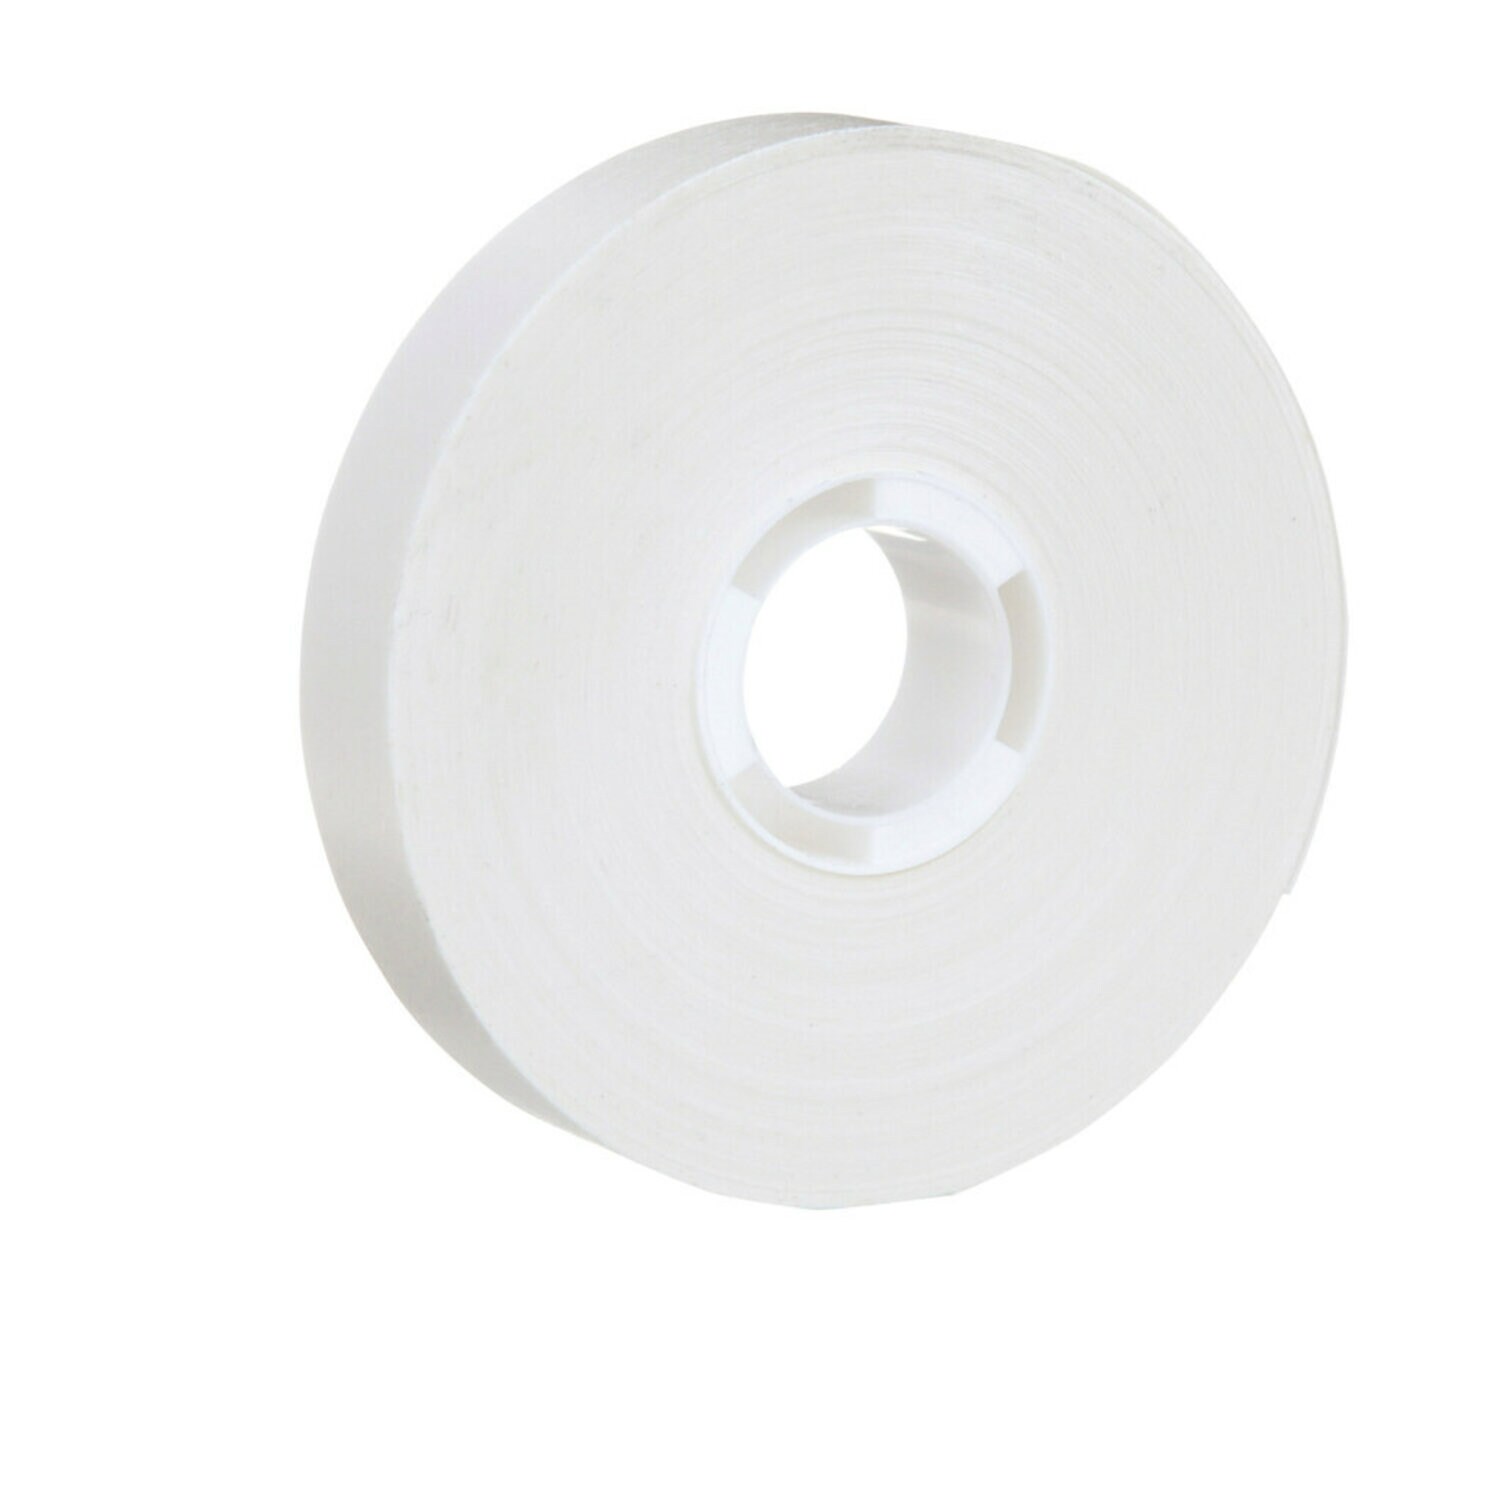 7000123437 - Scotch ATG Repositionable Double Coated Tissue Tape 928, Translucent
White, 3/4 in x 36 yd, 2 mil, 12 rolls/inner, 4 inners/case